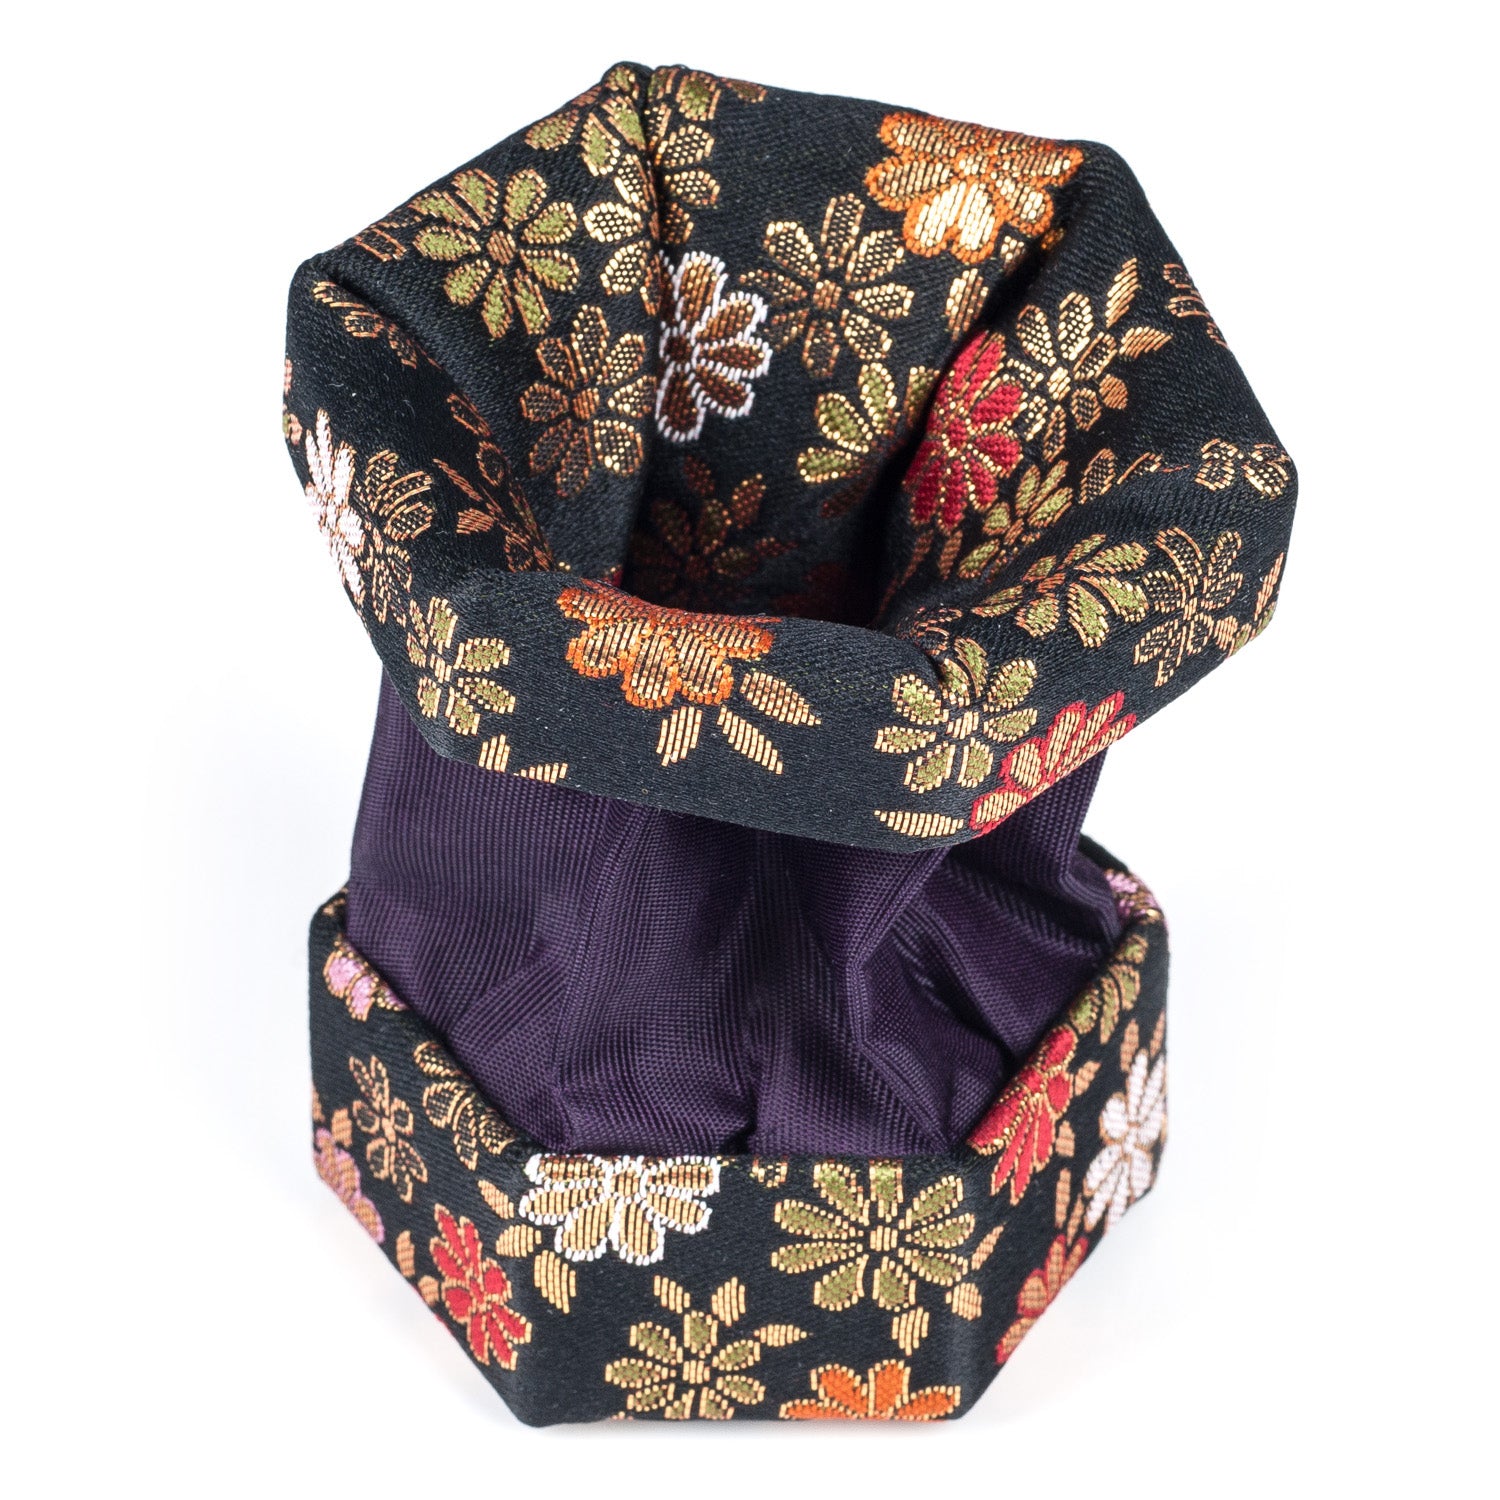 Black Floral Traditional Japanese Jewellery Box